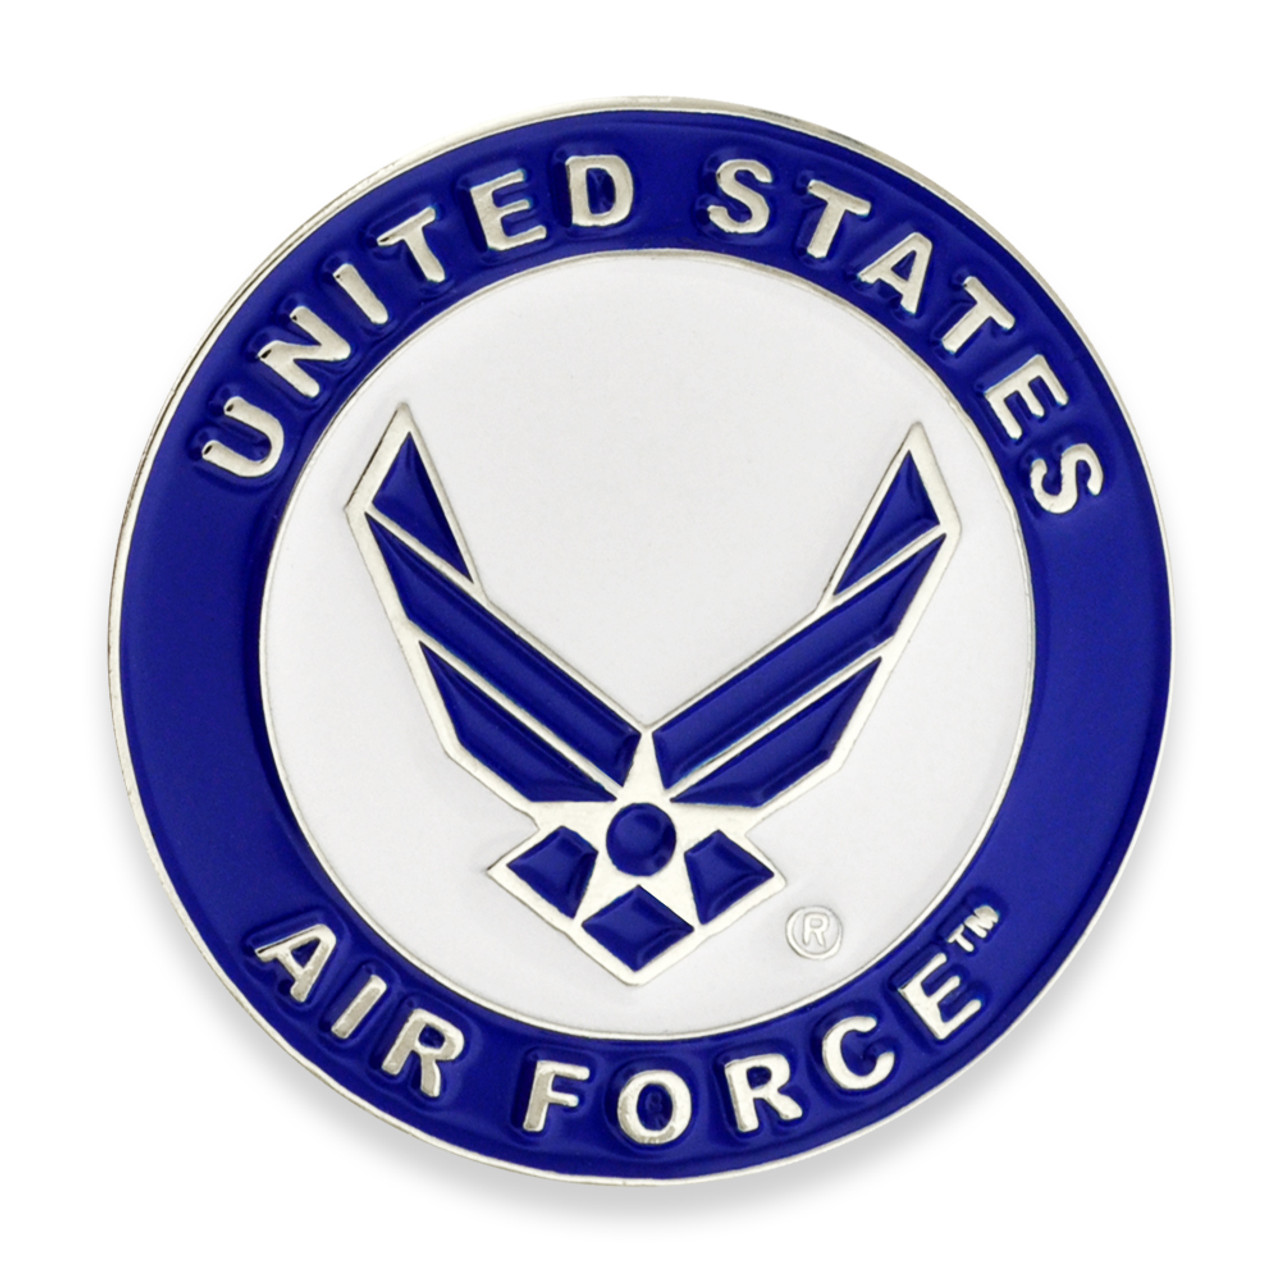 Officially Licensed U.S. Air Force Pin | PinMart